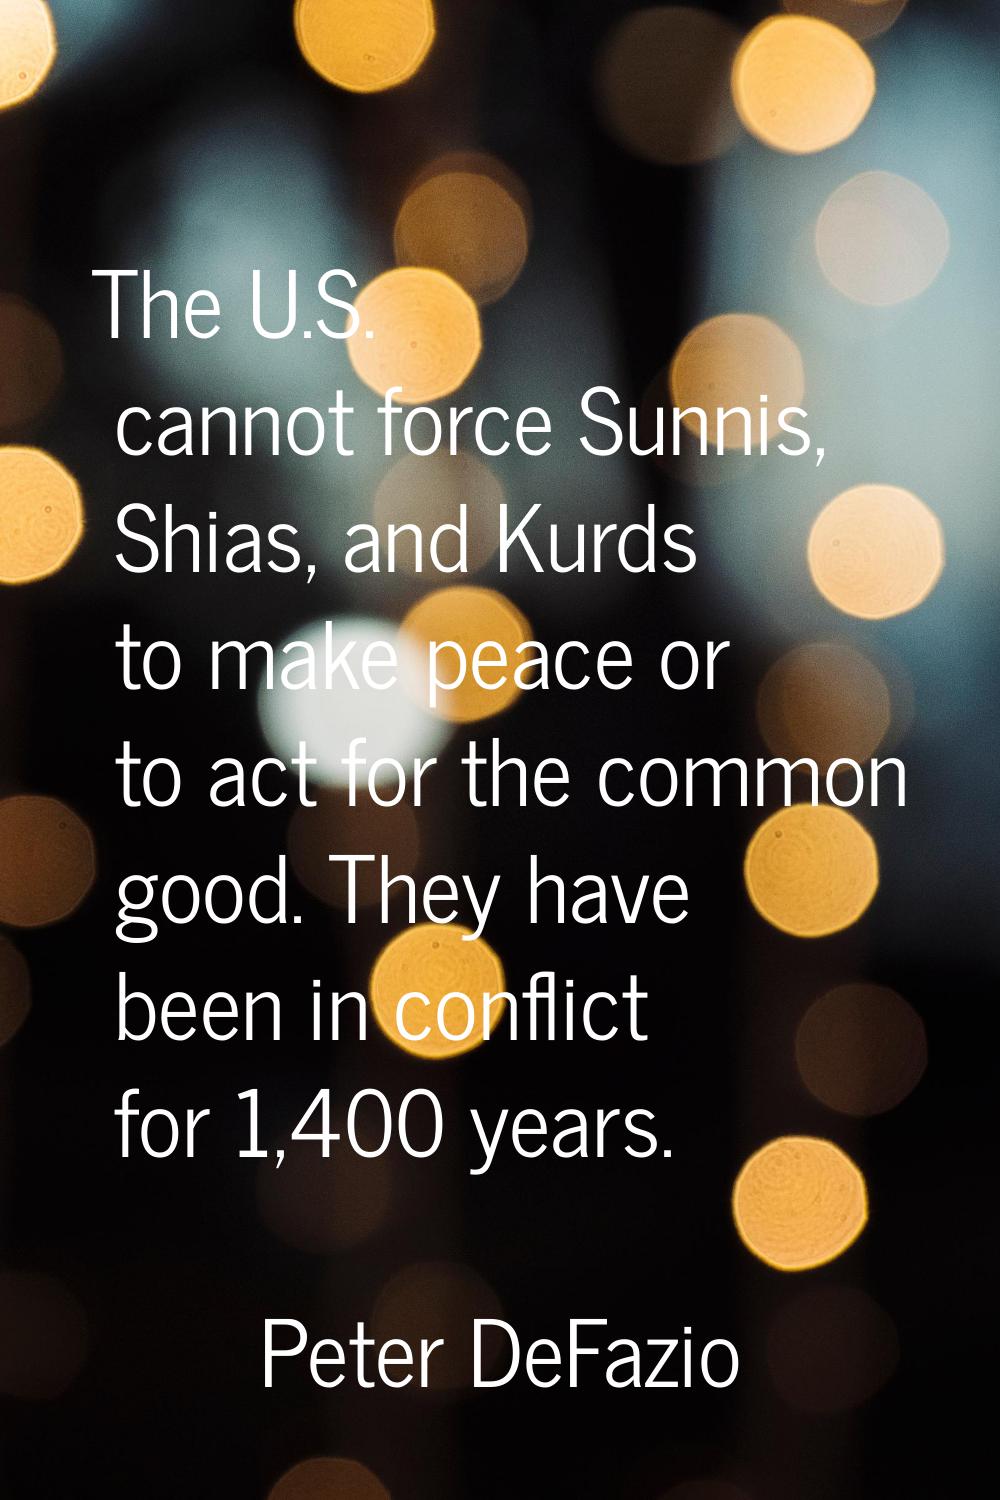 The U.S. cannot force Sunnis, Shias, and Kurds to make peace or to act for the common good. They ha